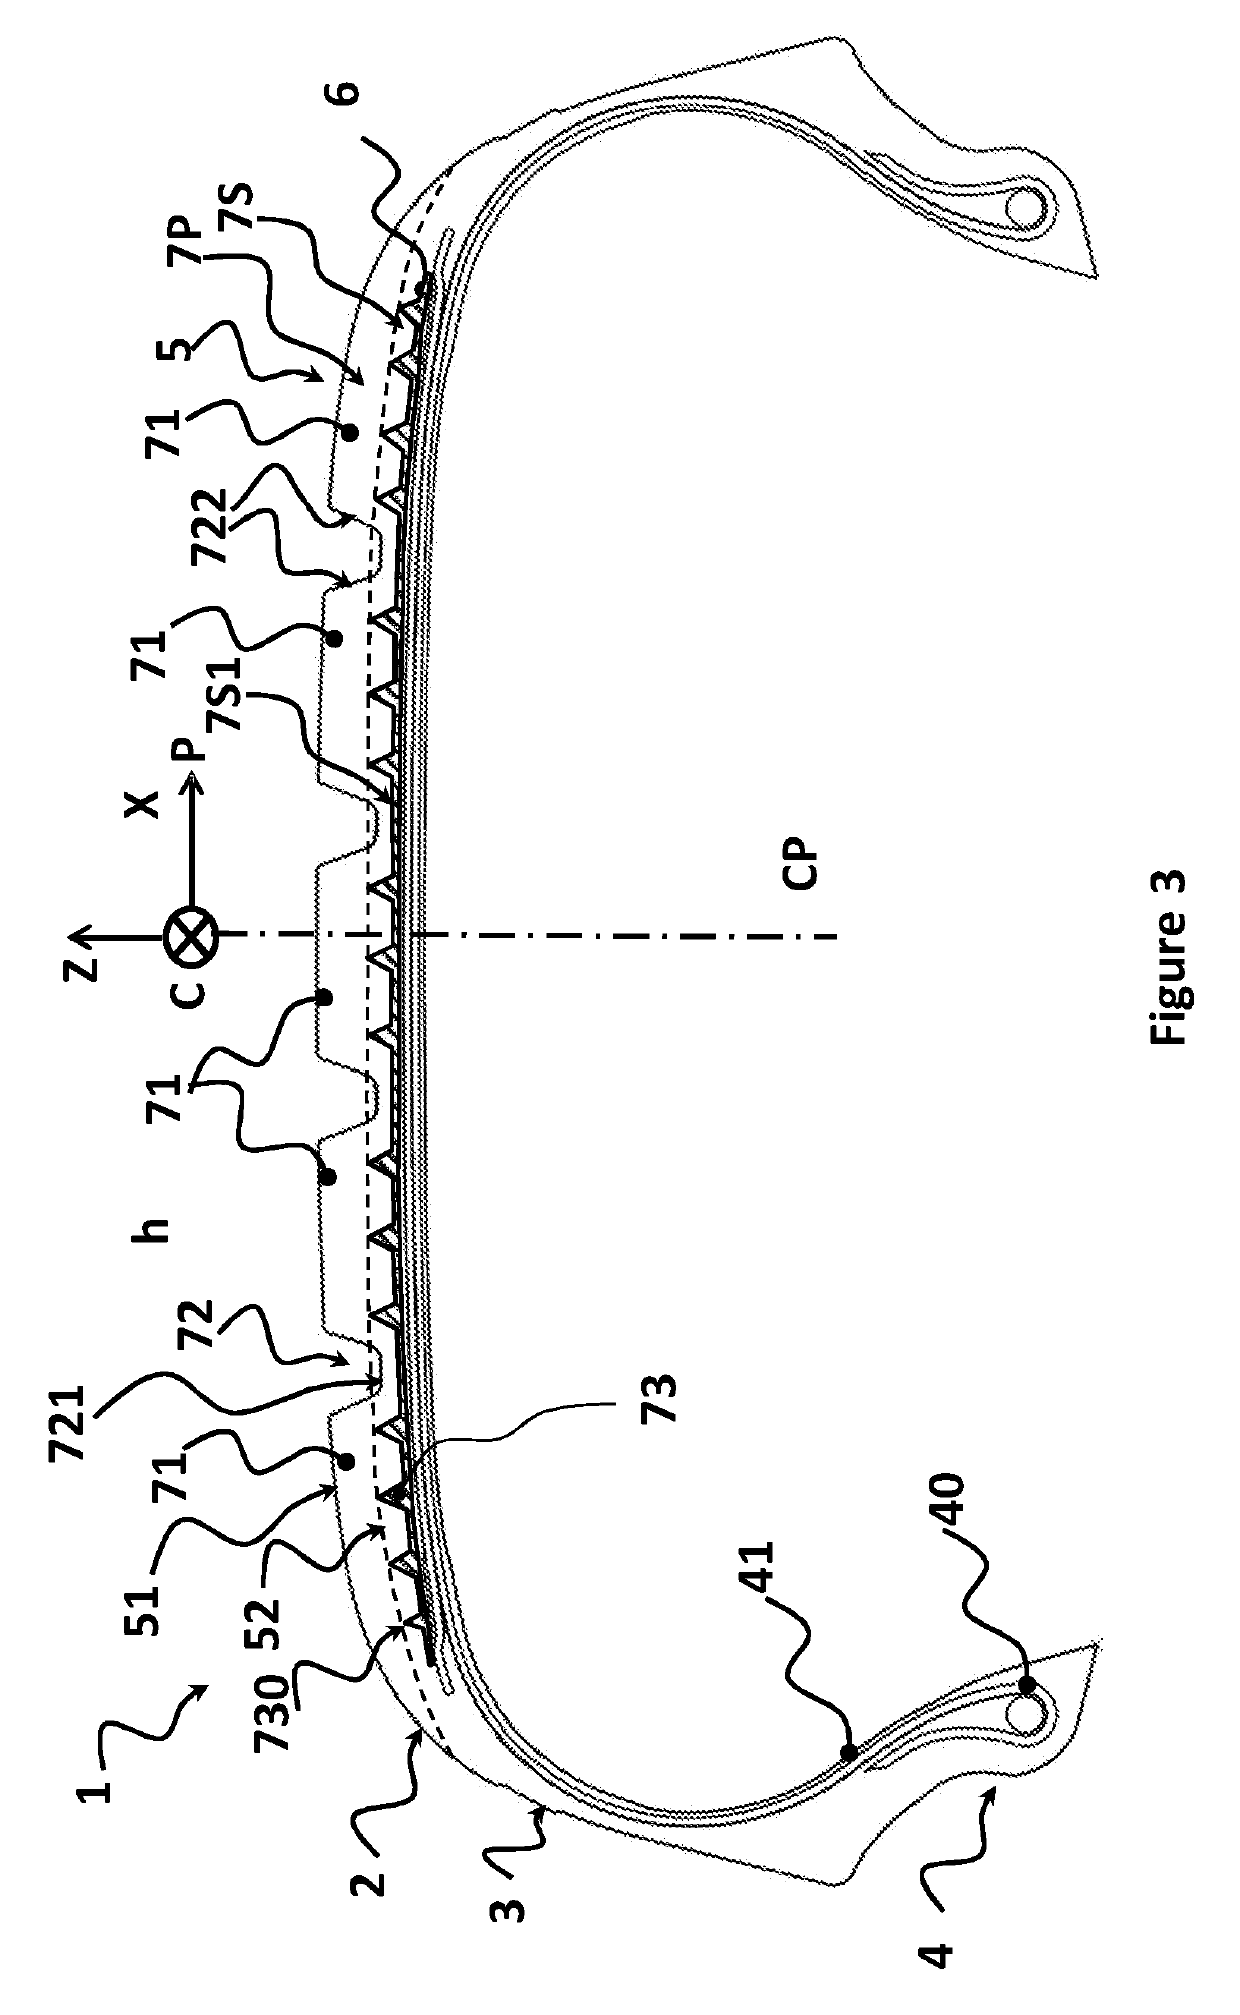 Tire comprising a tread containing circumferential reinforcing elements in the sublayer